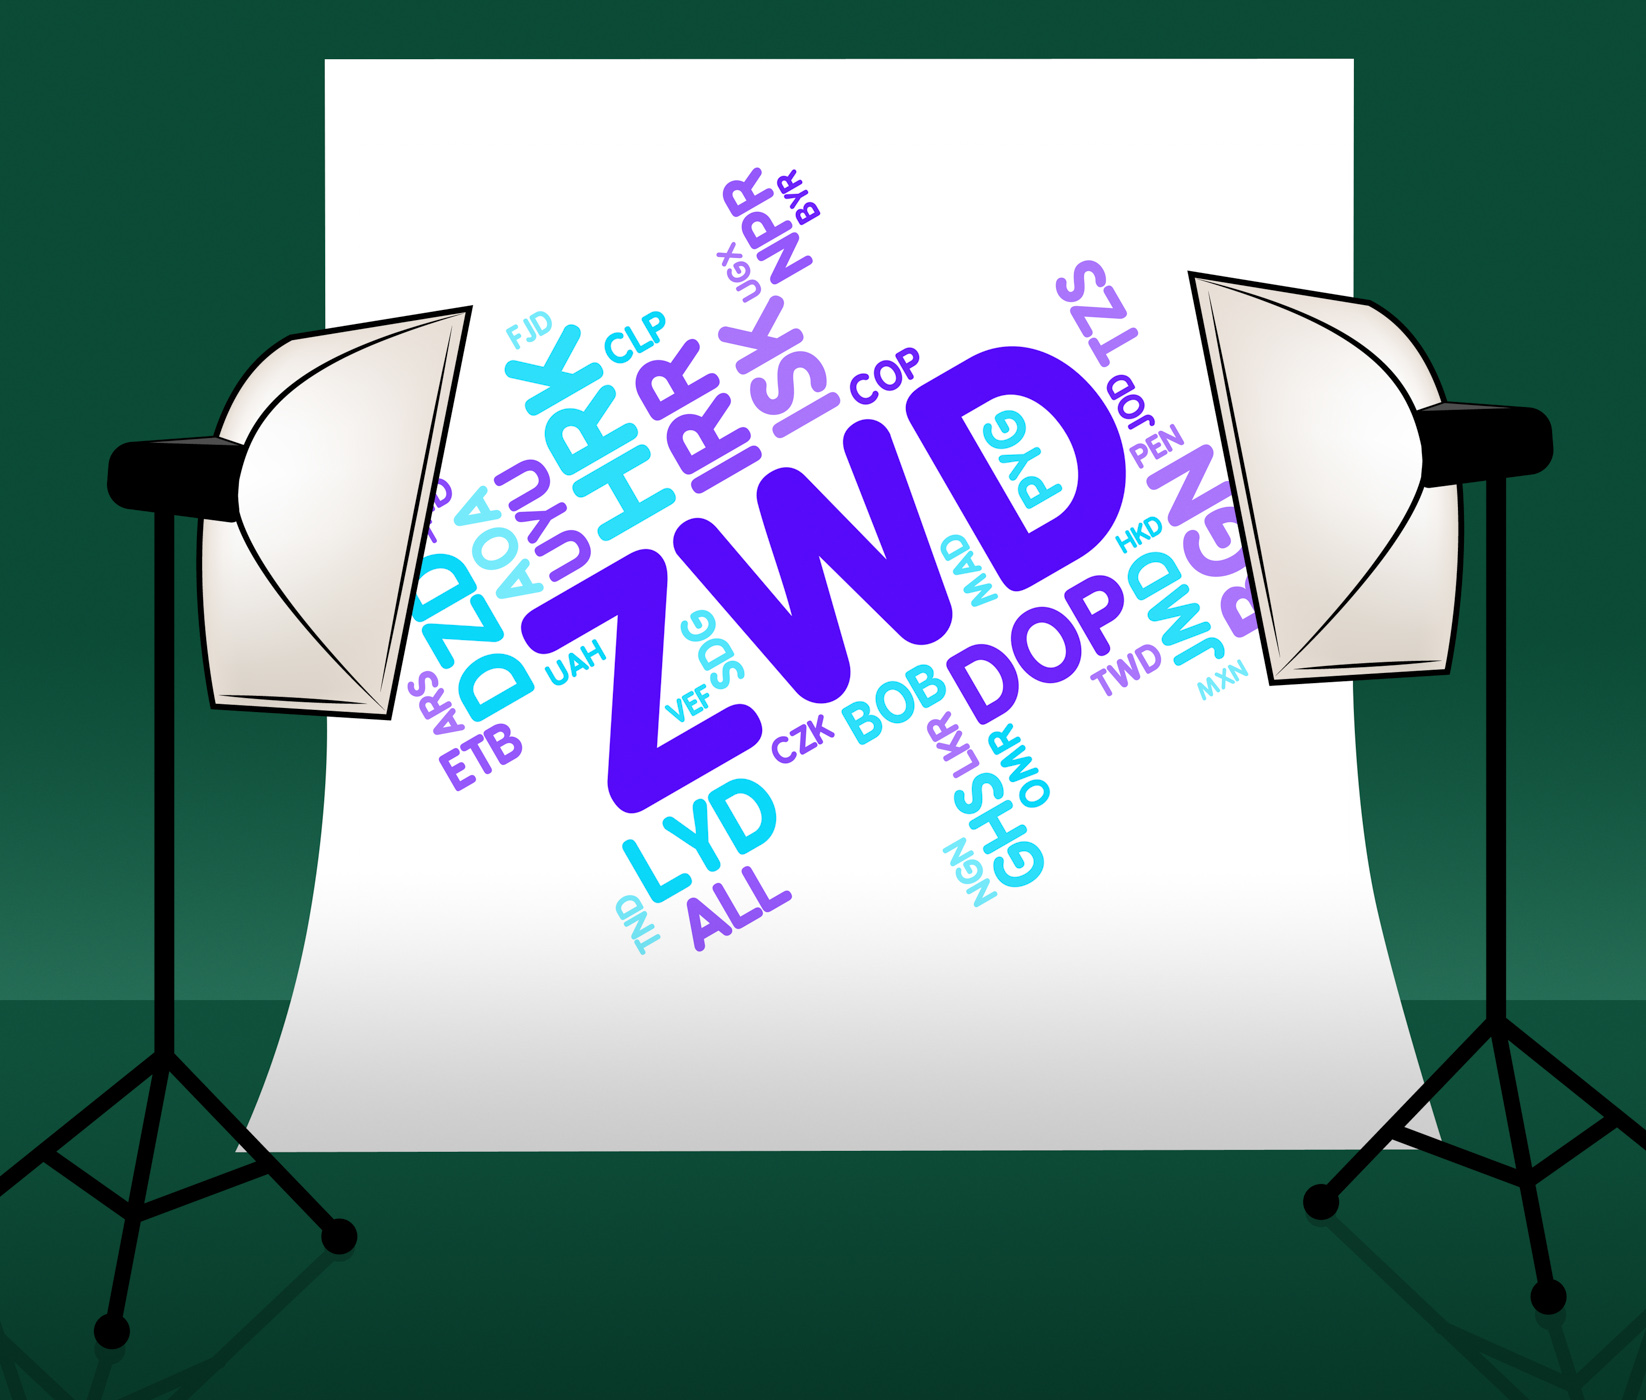 Zwd currency represents forex trading and broker photo